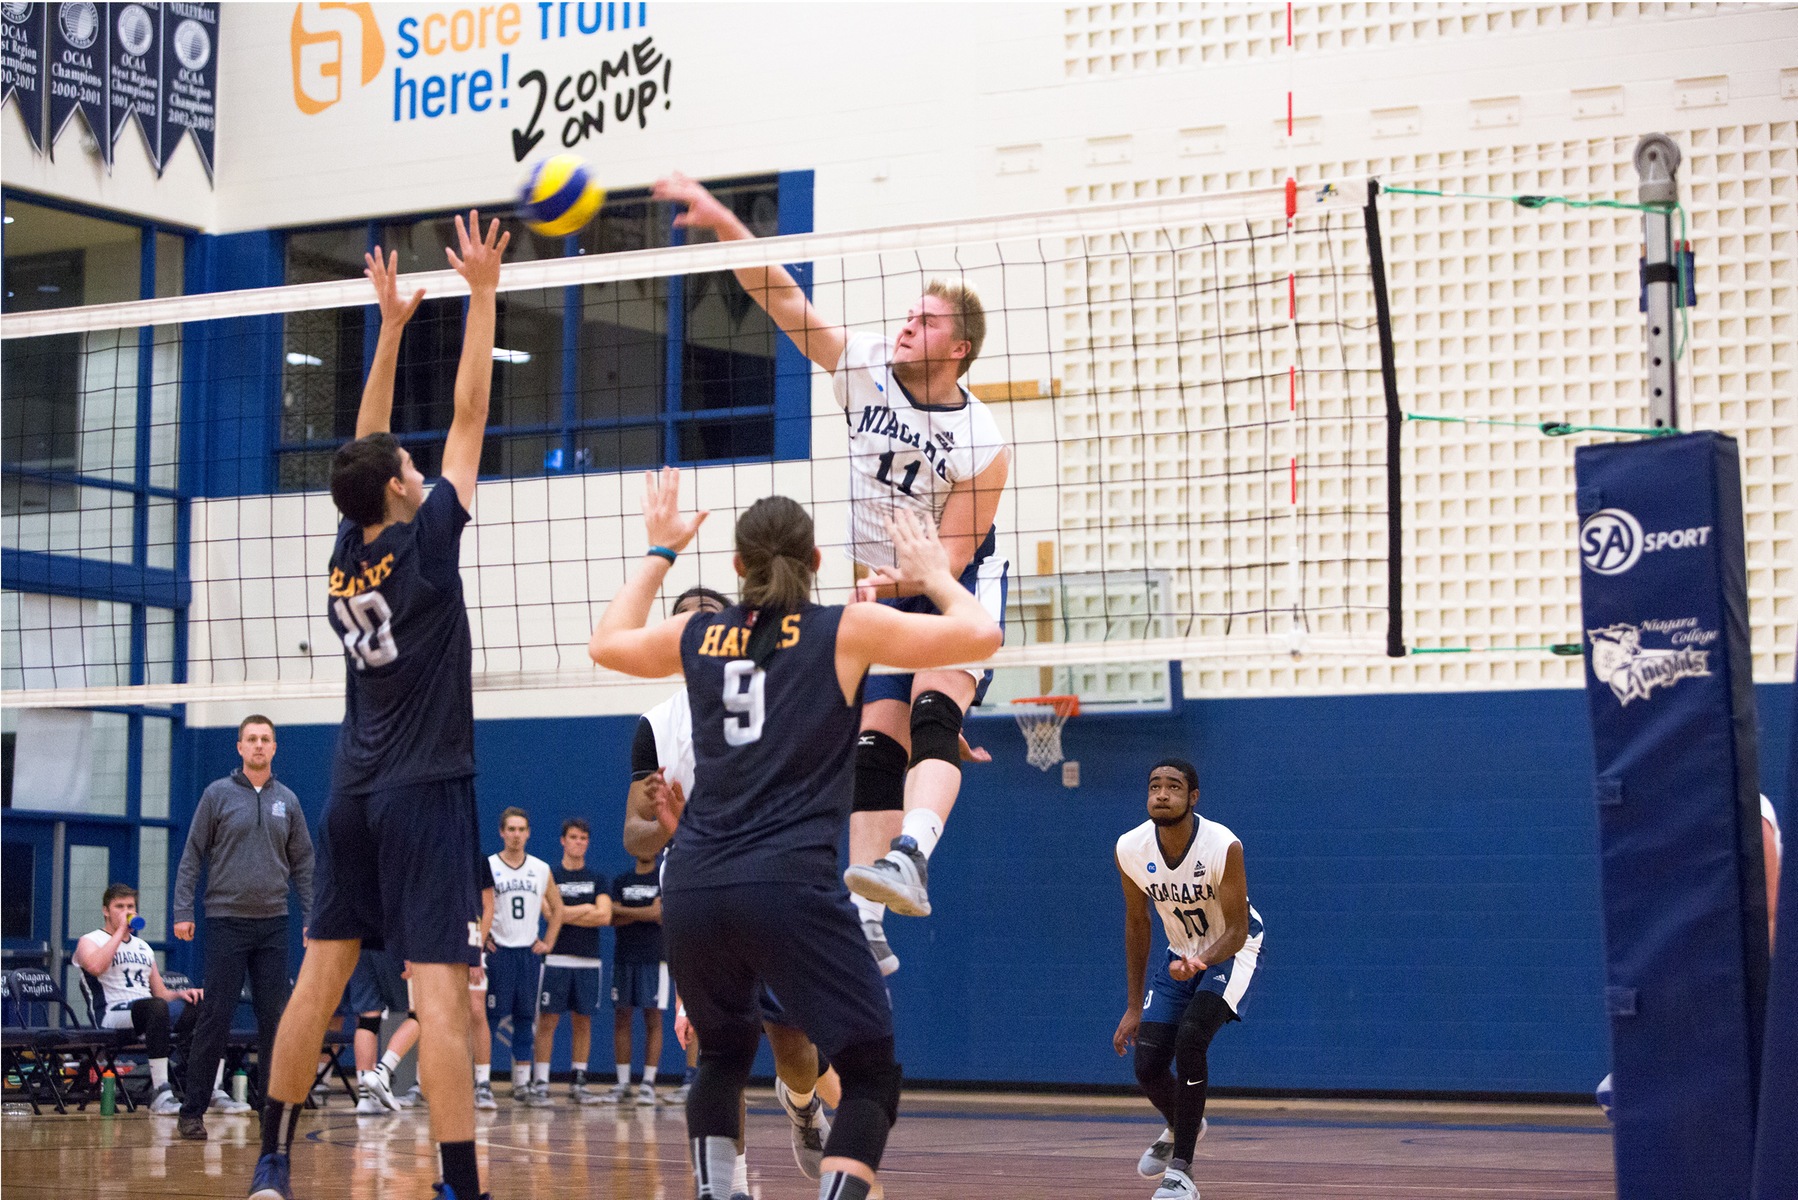 RECAP: Career day for VandenBurg leads Knights Volleyball over Condors